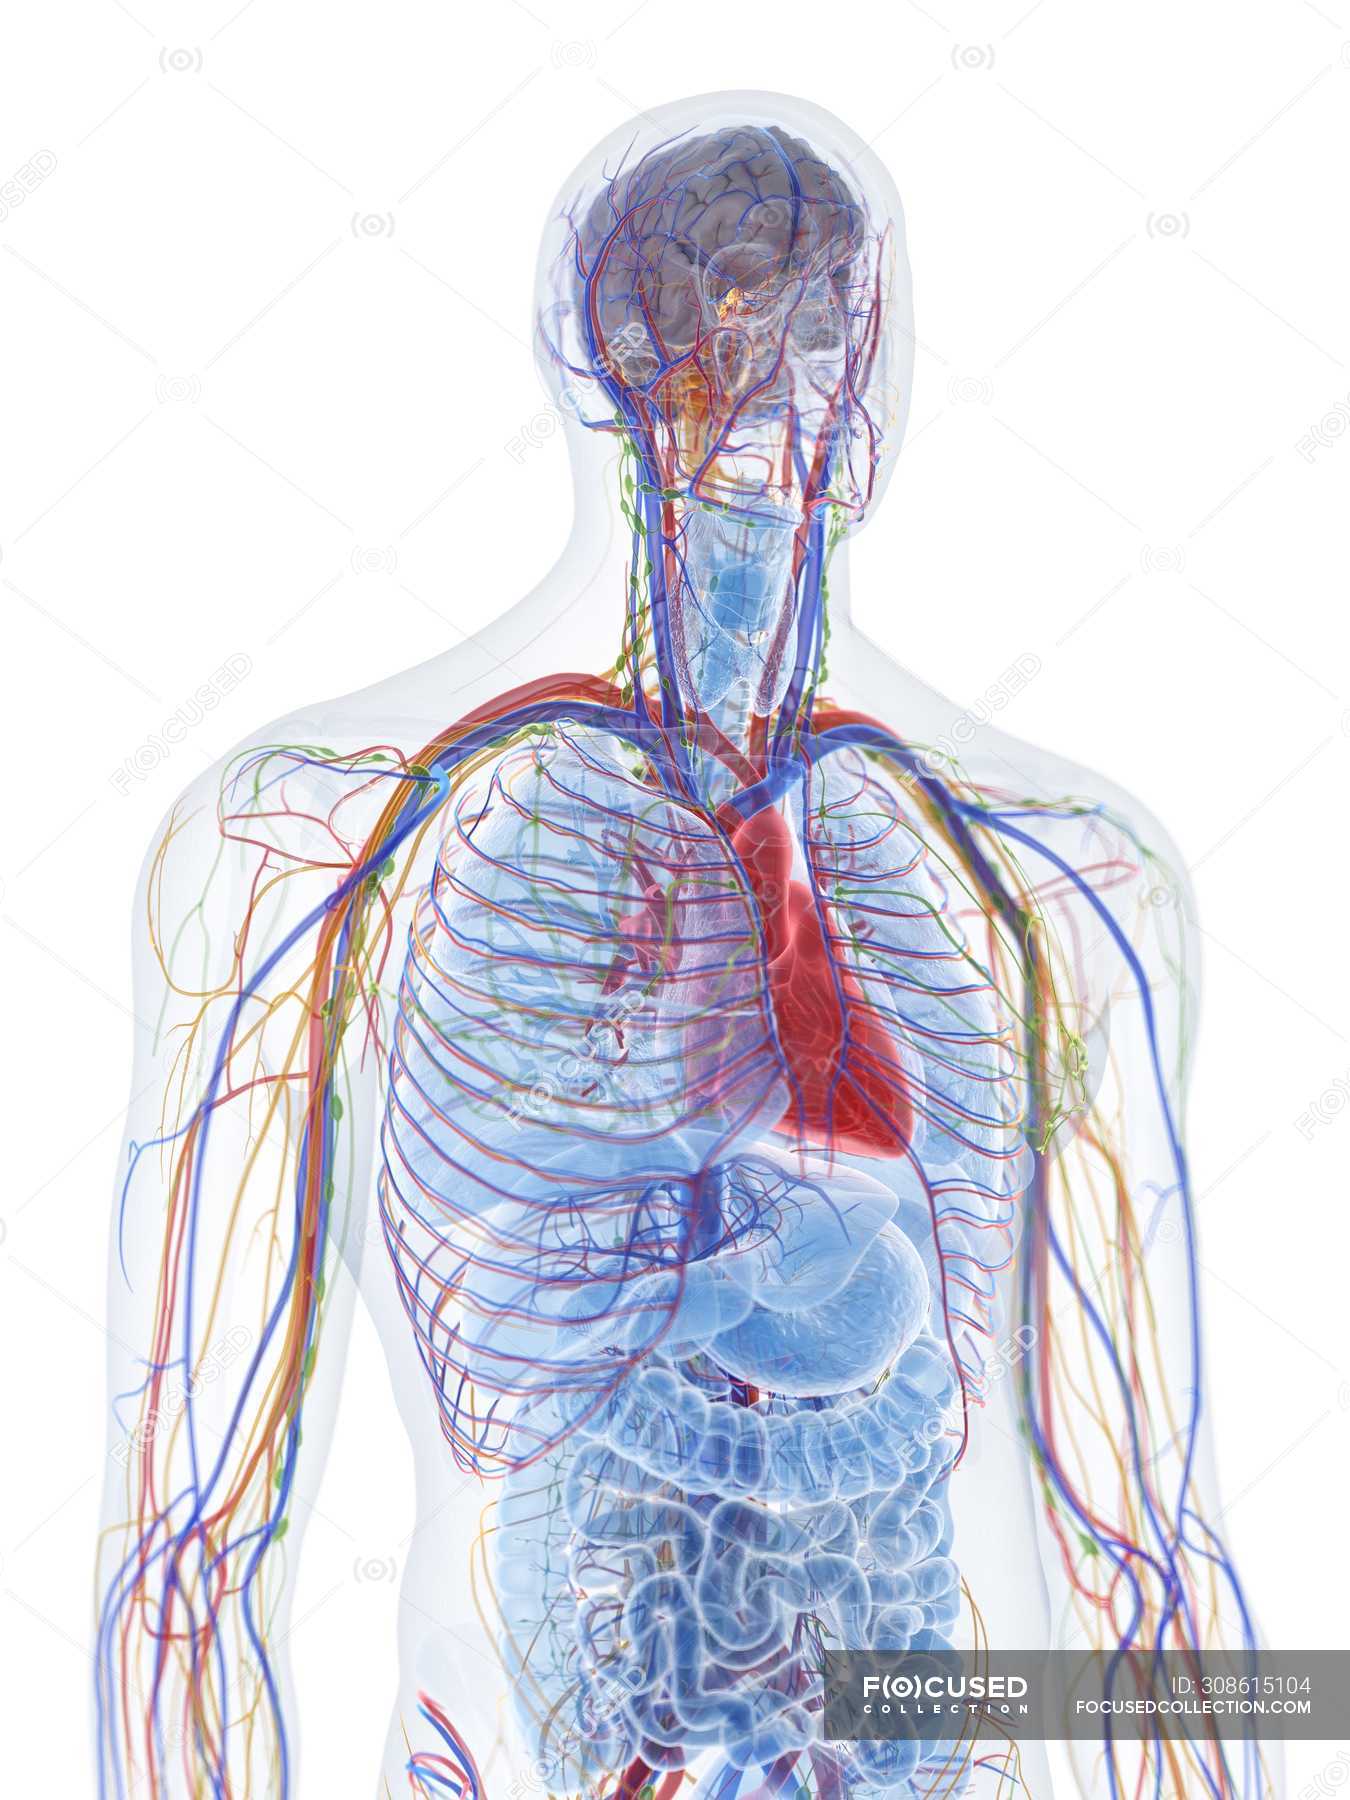 Male Upper Body Anatomy And Blood Vessels Computer Illustration 3d Rendering Anatomical Stock Photo 308615104